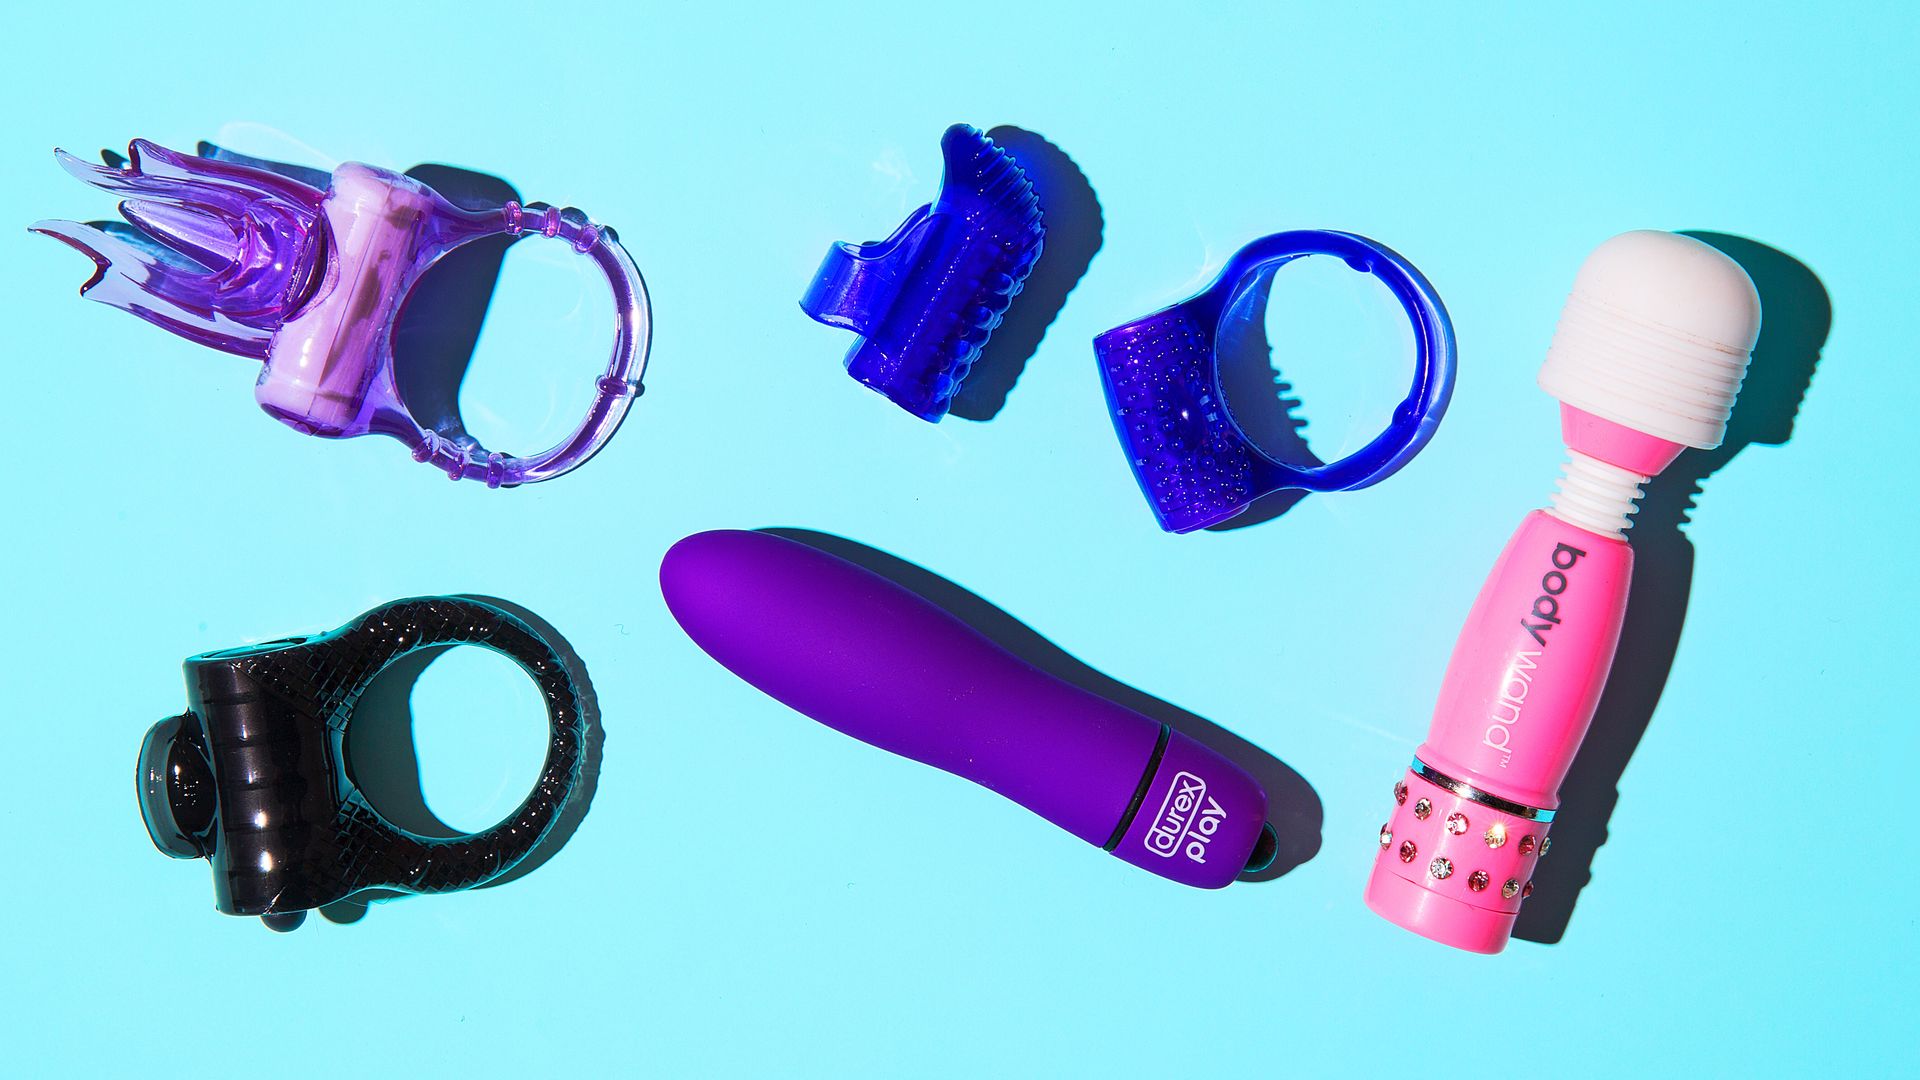 Inheems Tot ziens Adviseren I Tried 5 Drugstore Sex Toys - Vibrator Product Reviews